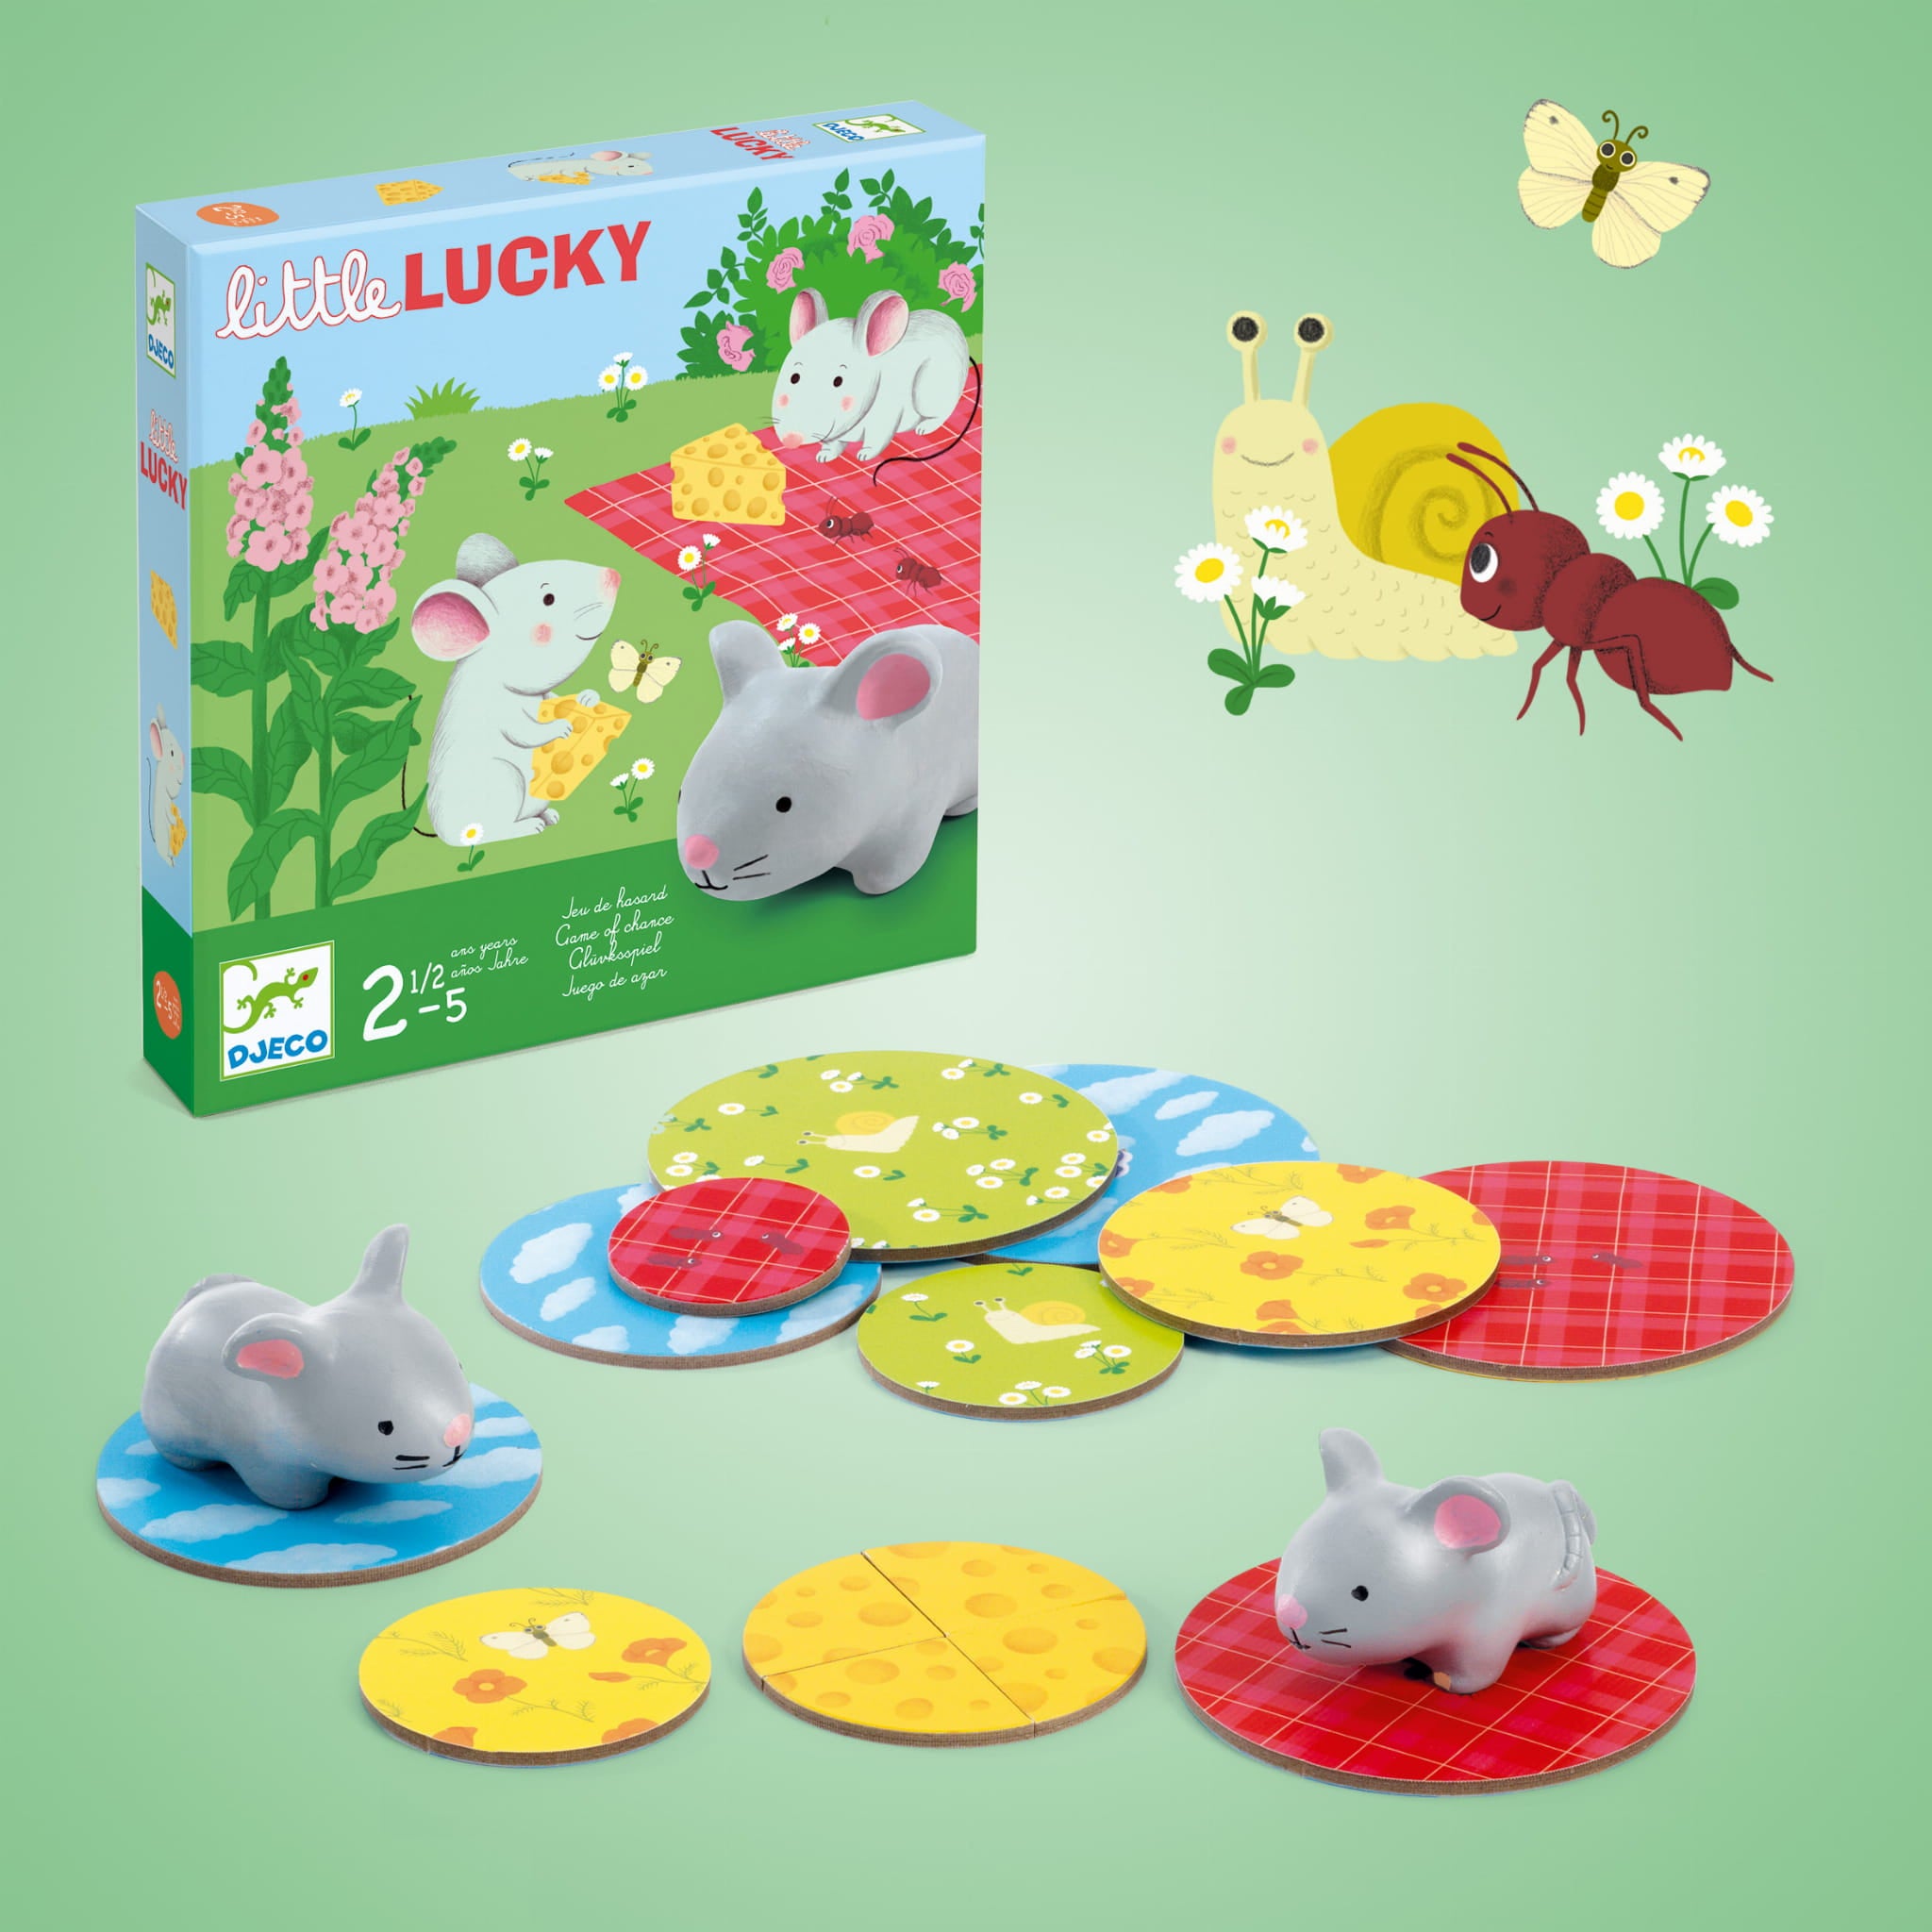 Djeco: board game mouse and Little Lucky cheese